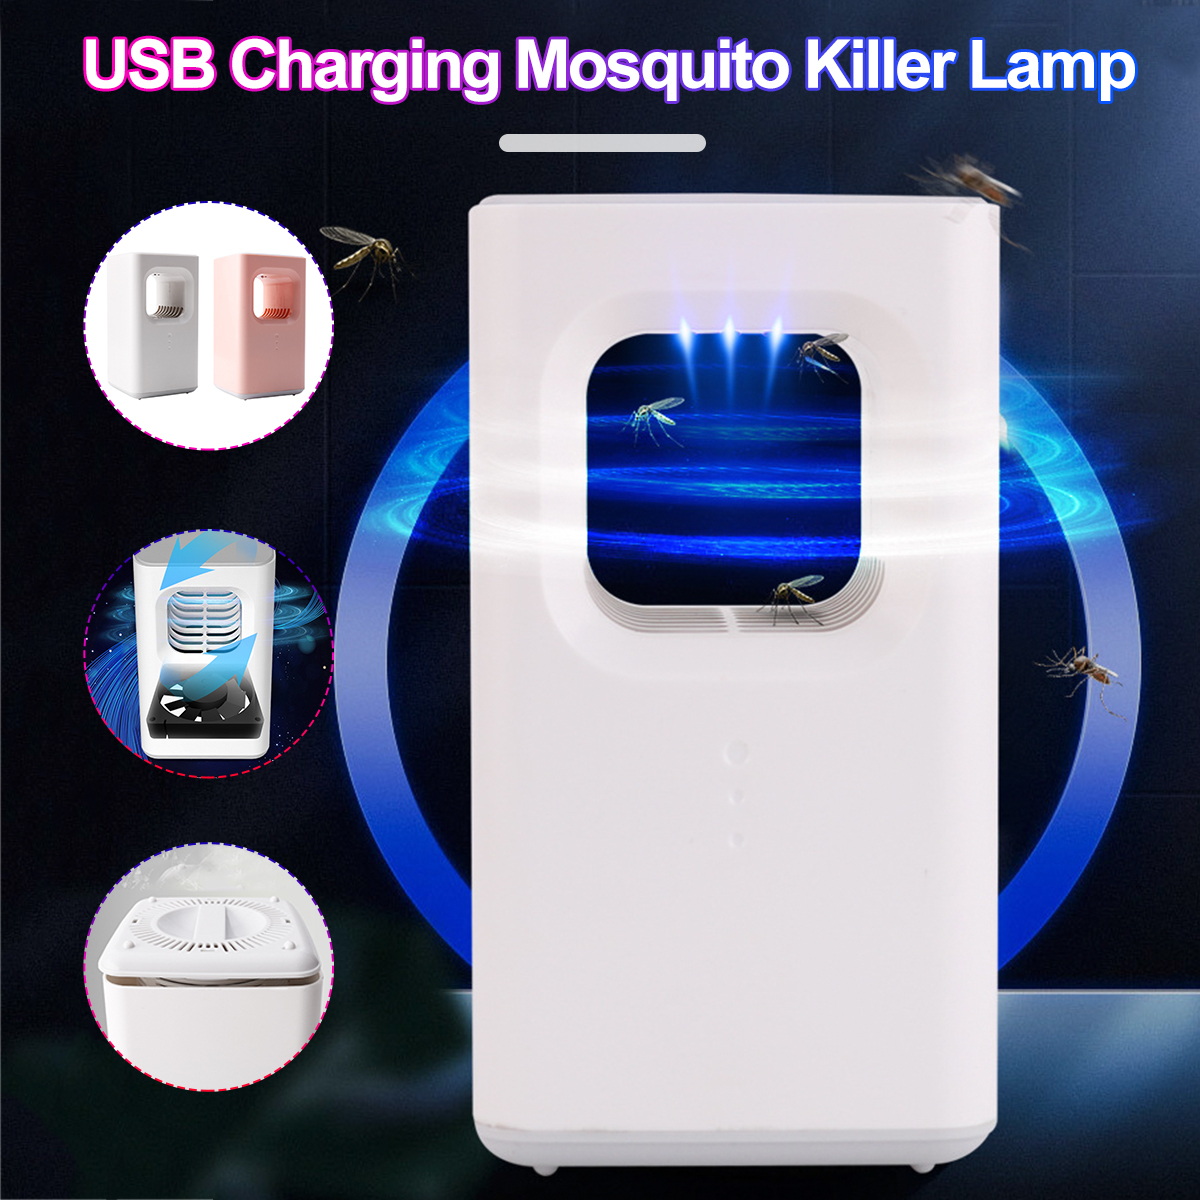 Mosquito-Killer-Lamp-USB-Low-Noise-Insect-Repellent-Mosquito-Dispeller-For-Home-Hotel-Office-1650186-2